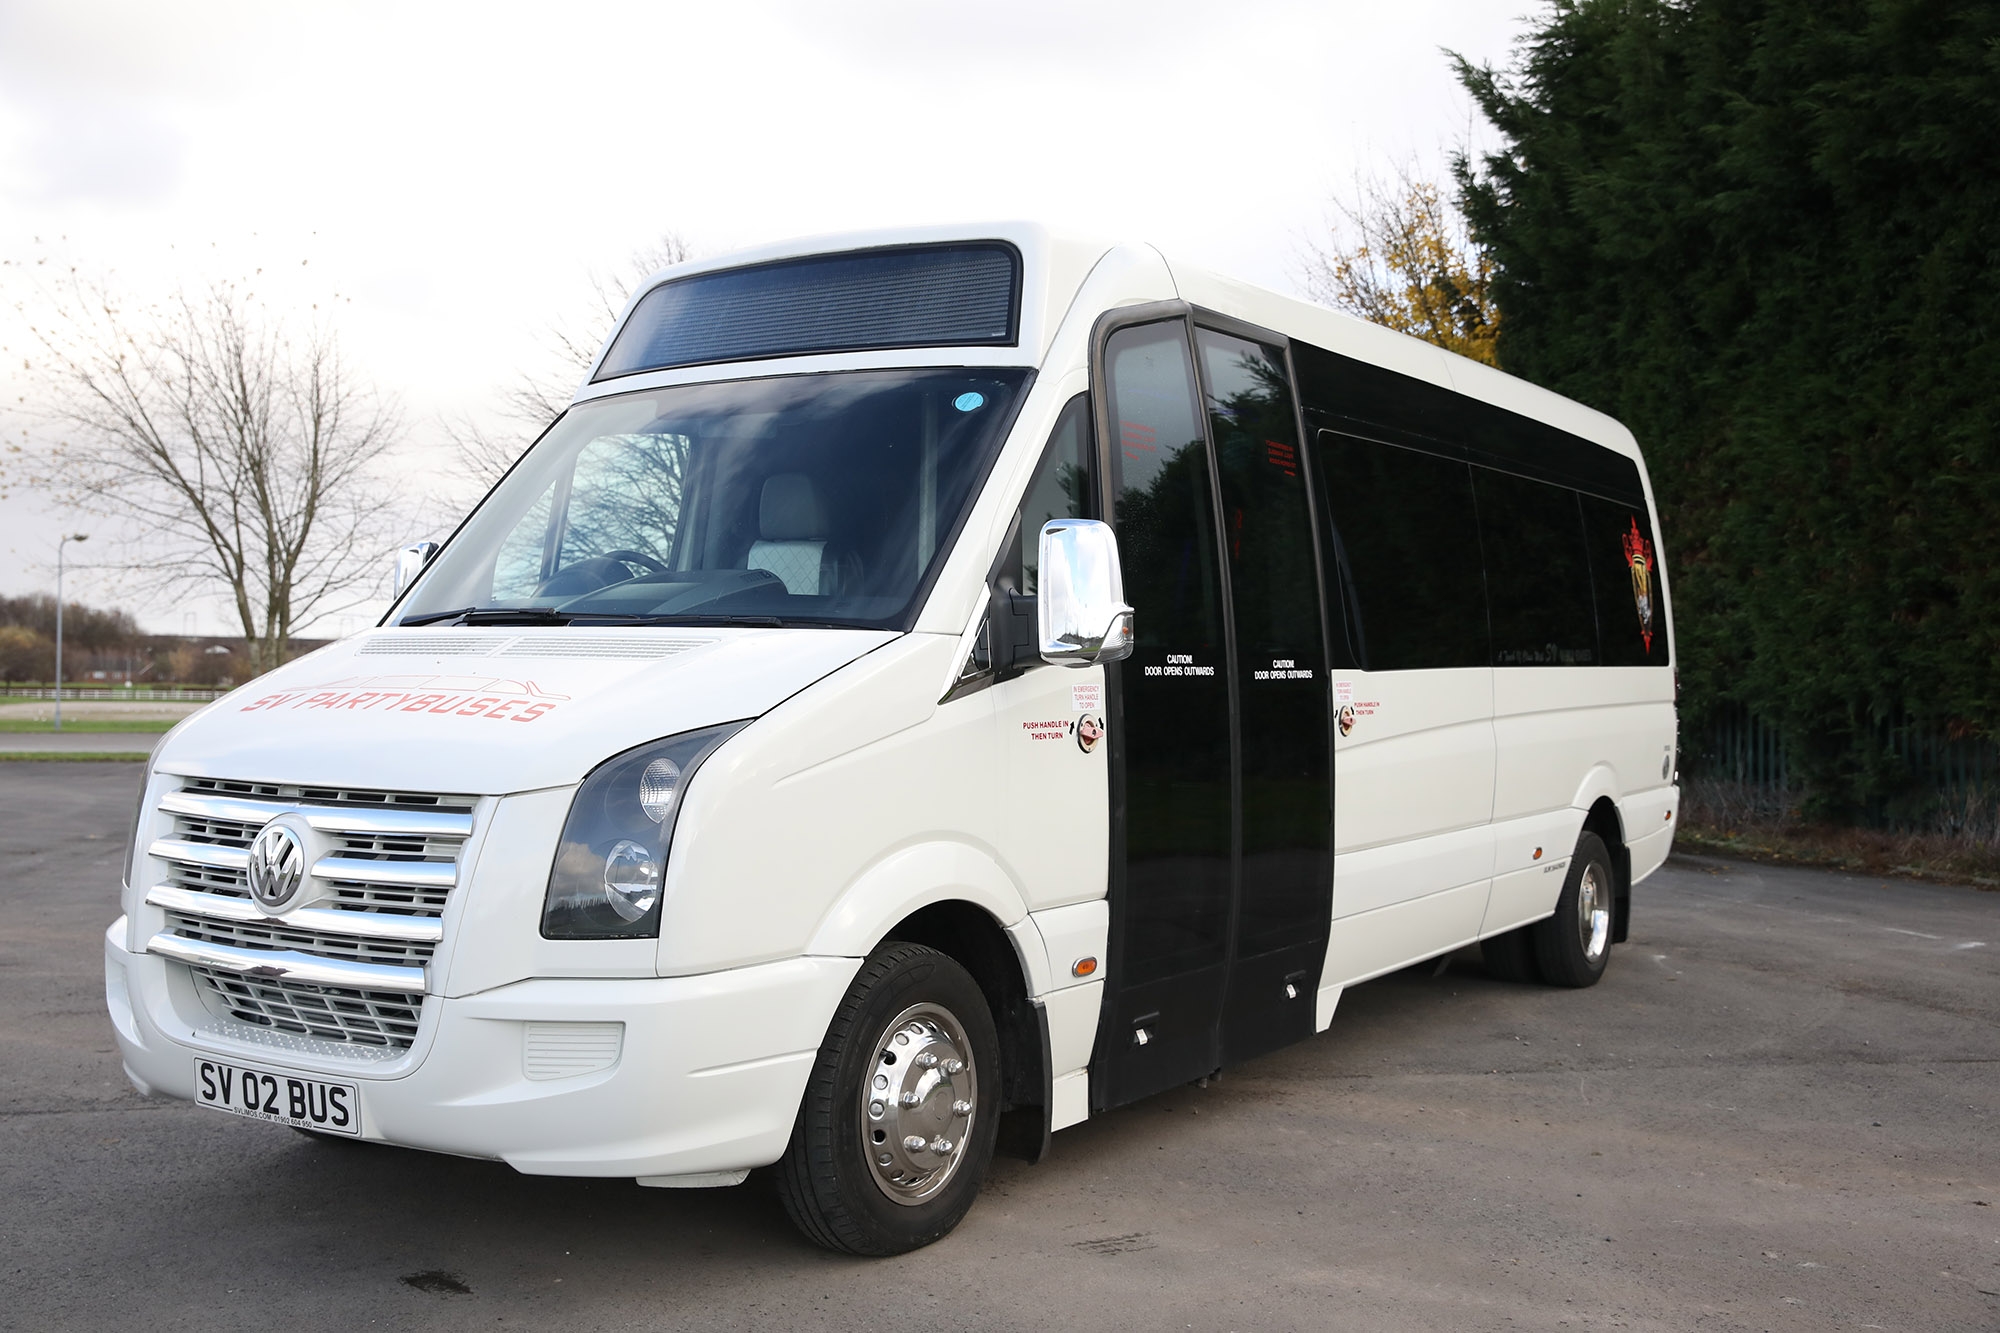 Making Your Oxford Event Special with Party Bus Hire